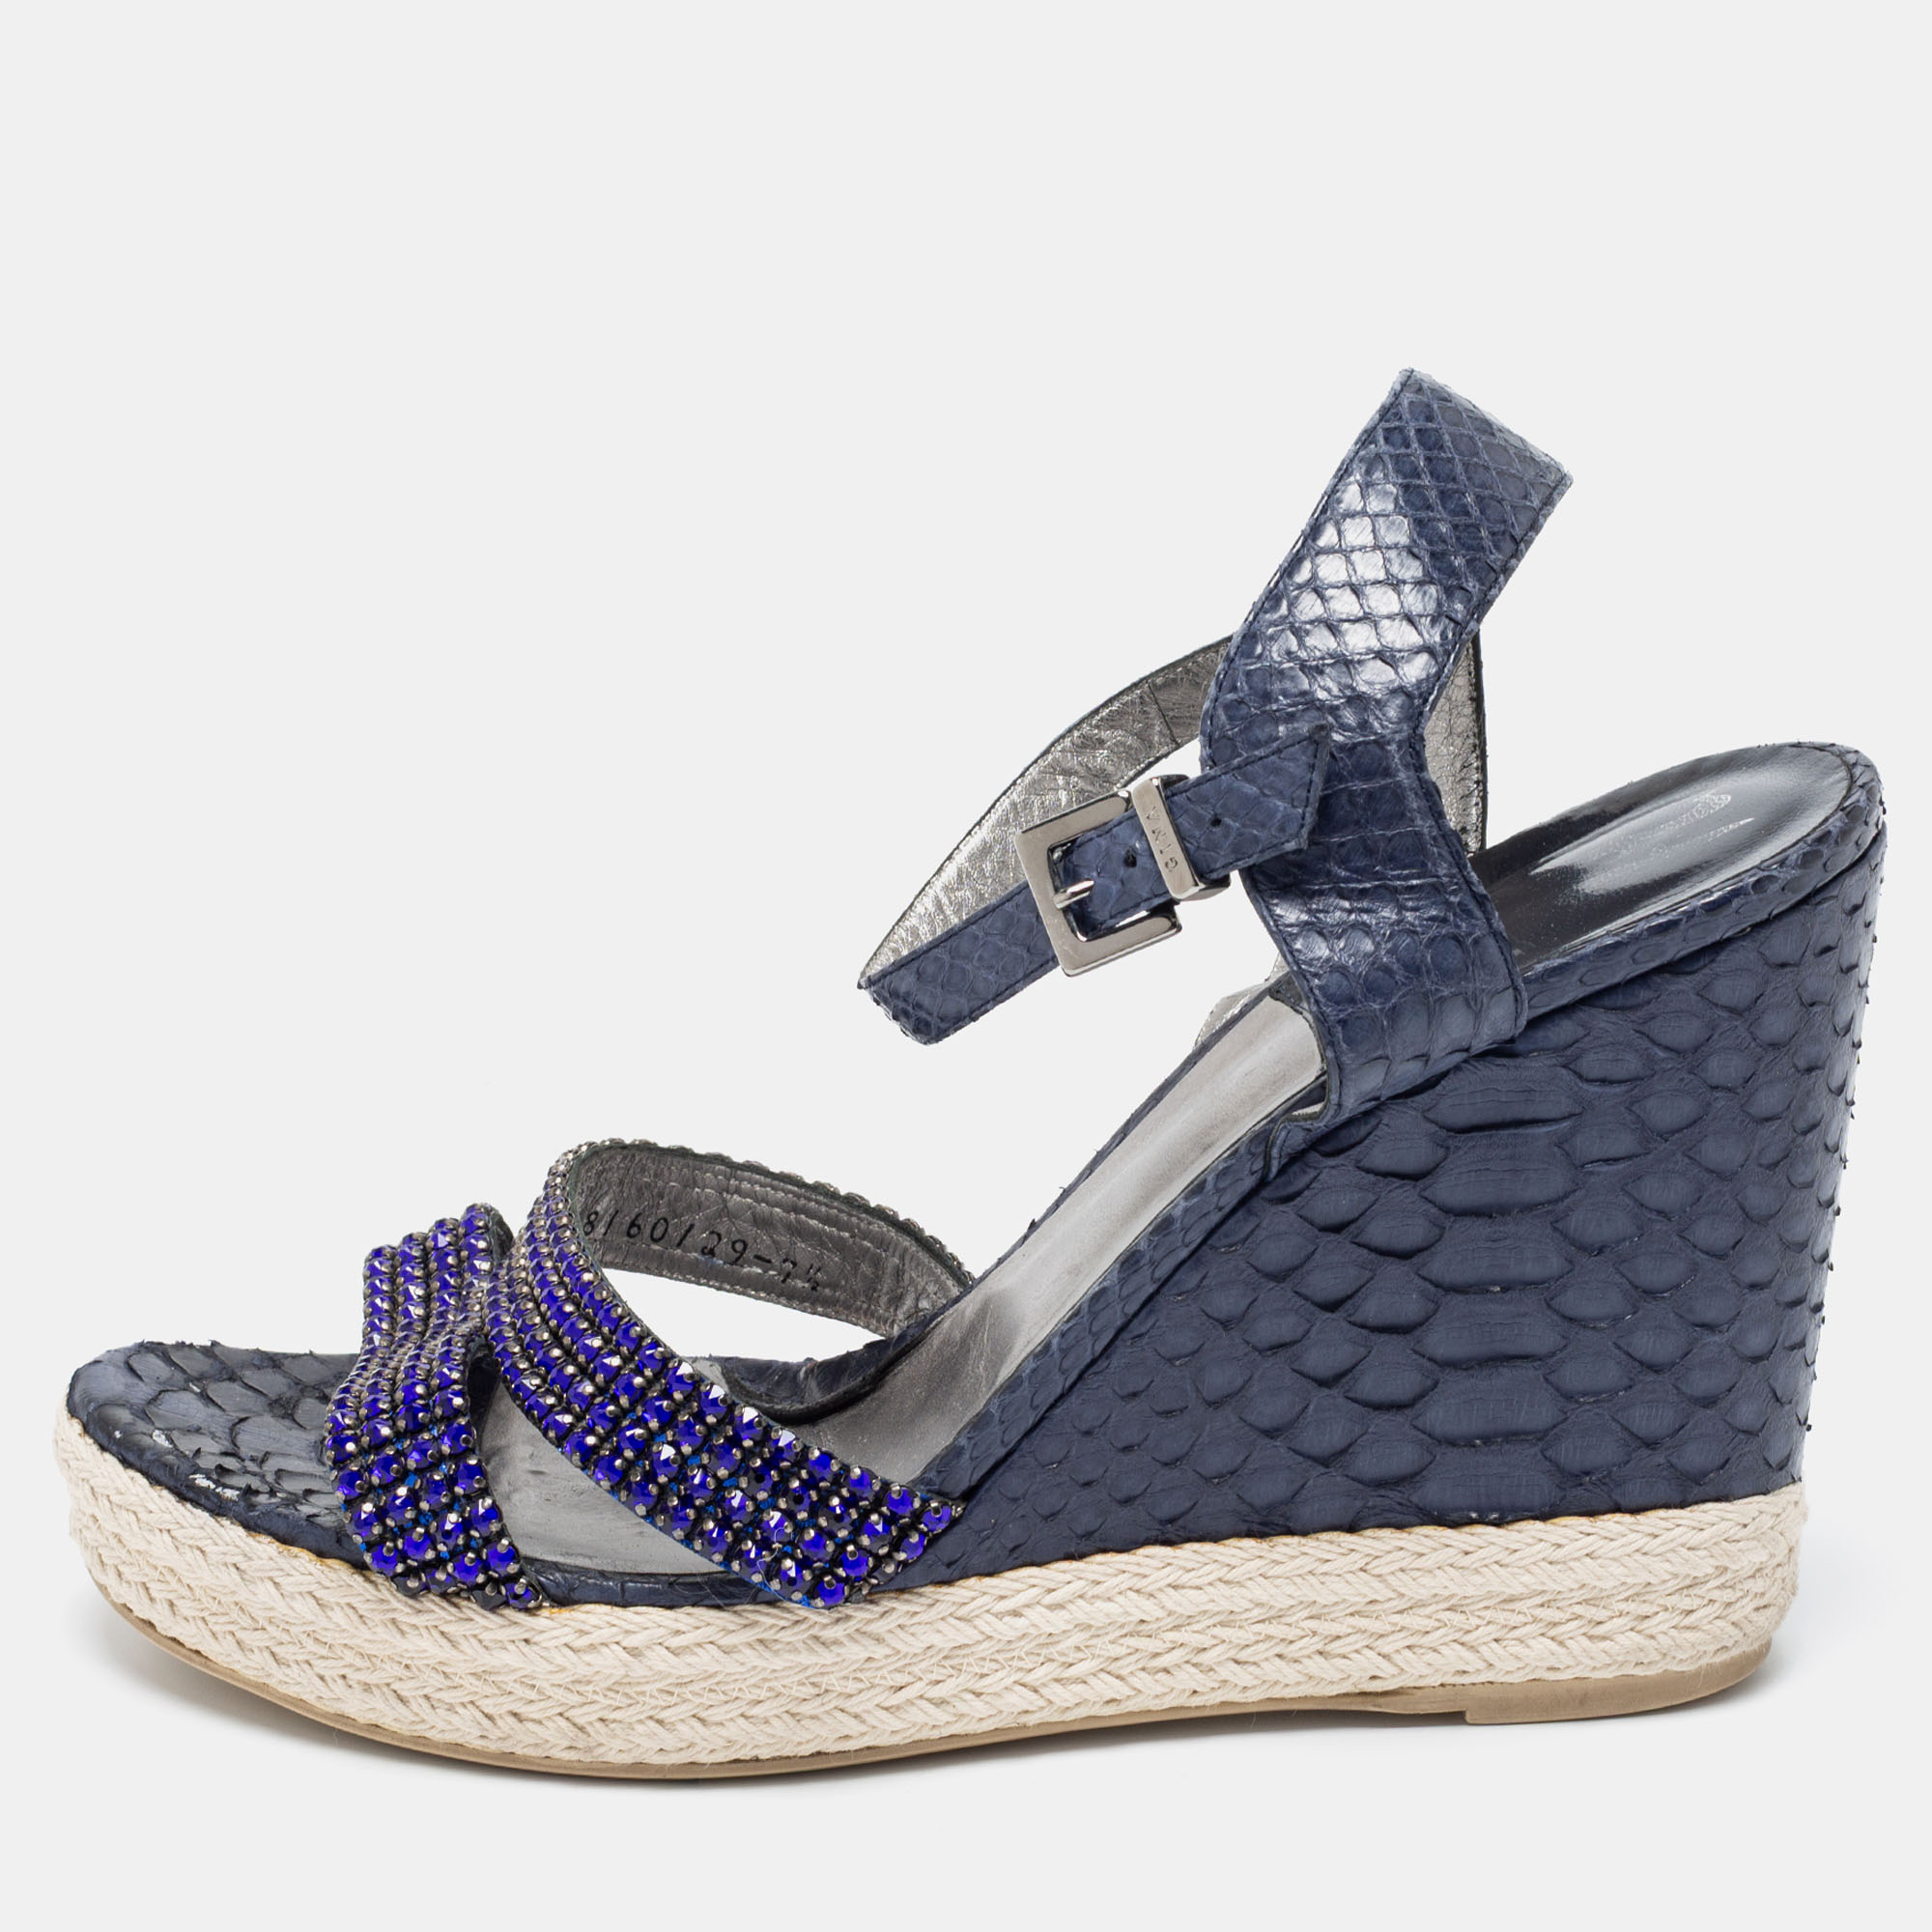 Elevate the charm of your outfits with these beautiful Gina sandals that are easy to wear. Constructed using python leather these sandals feature crystal detailing for a distinct look. They are set on wedge heels